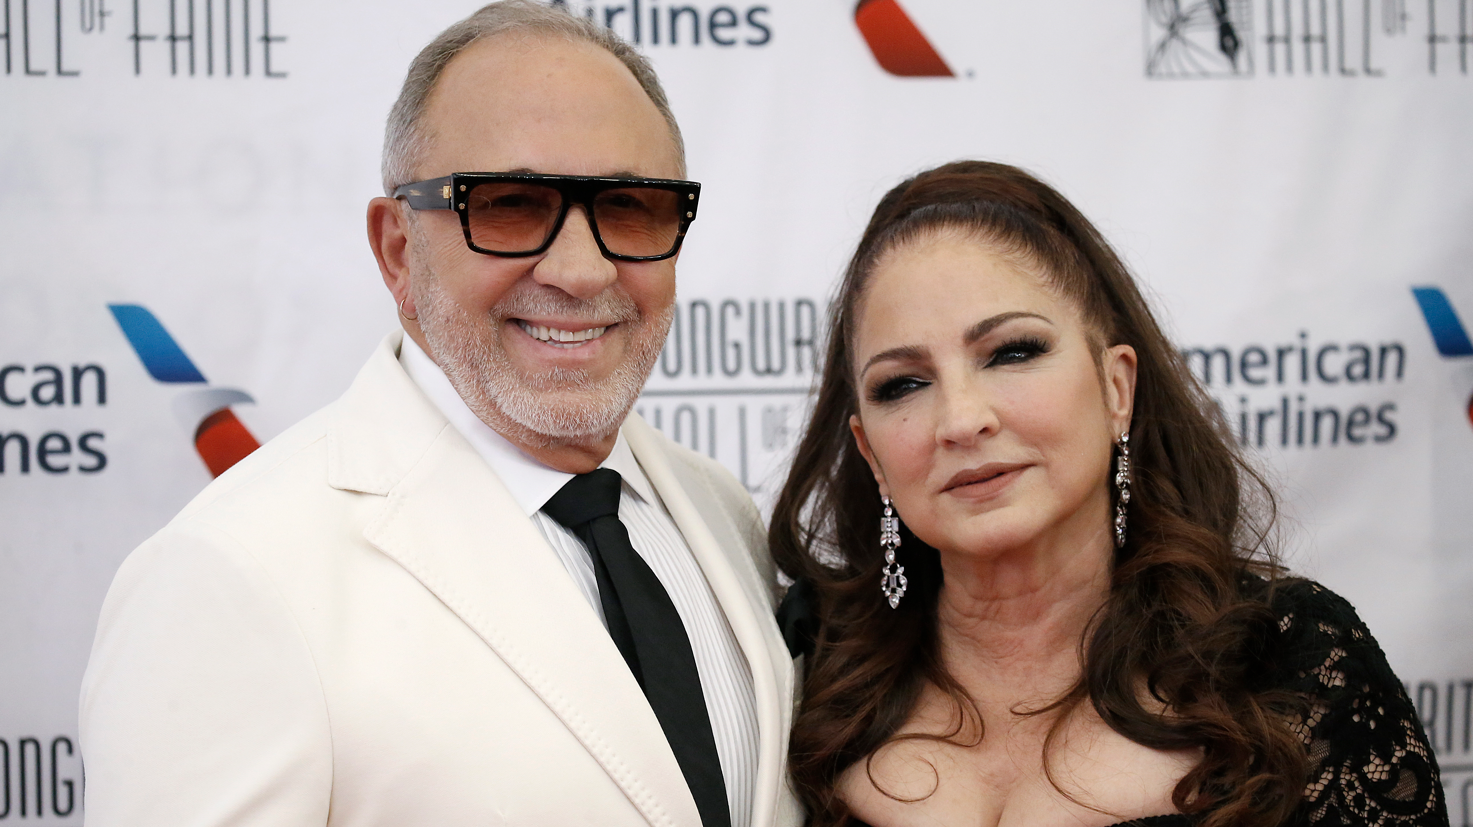 Emilio Estefan reveals key to clinching the American dream: ‘Have love for this country’